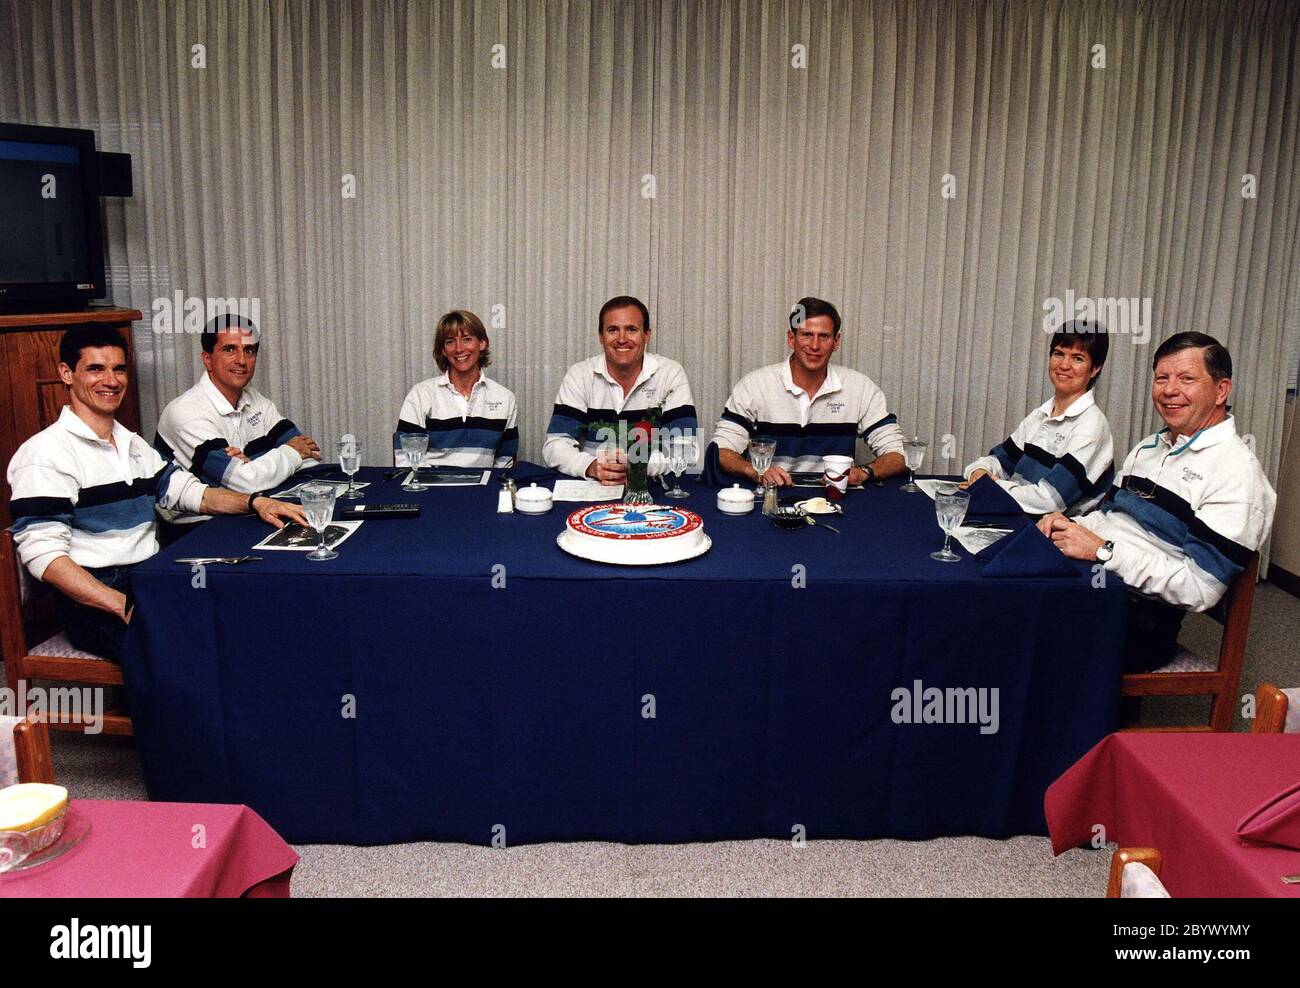 The STS-83 flight crew enjoys the traditional pre-liftoff breakfast in the crew quarters of the Operations and Checkout Building. They are (from left): Payload Specialist Gregory T. Linteris; Mission Specialist Donald A. Thomas; Pilot Susan L. Still; Mission Commander James D. Halsell, Jr.; Mission Specialist Michael L. Gernhardt; Payload Commander Janice E. Voss; and Payload Specialist Roger K. Crouch. After a weather briefing, the flight crew will be fitted with their launch/entry suits and depart for Launch Pad 39A. Once there, they will take their positions in the crew cabin of the Space S Stock Photo